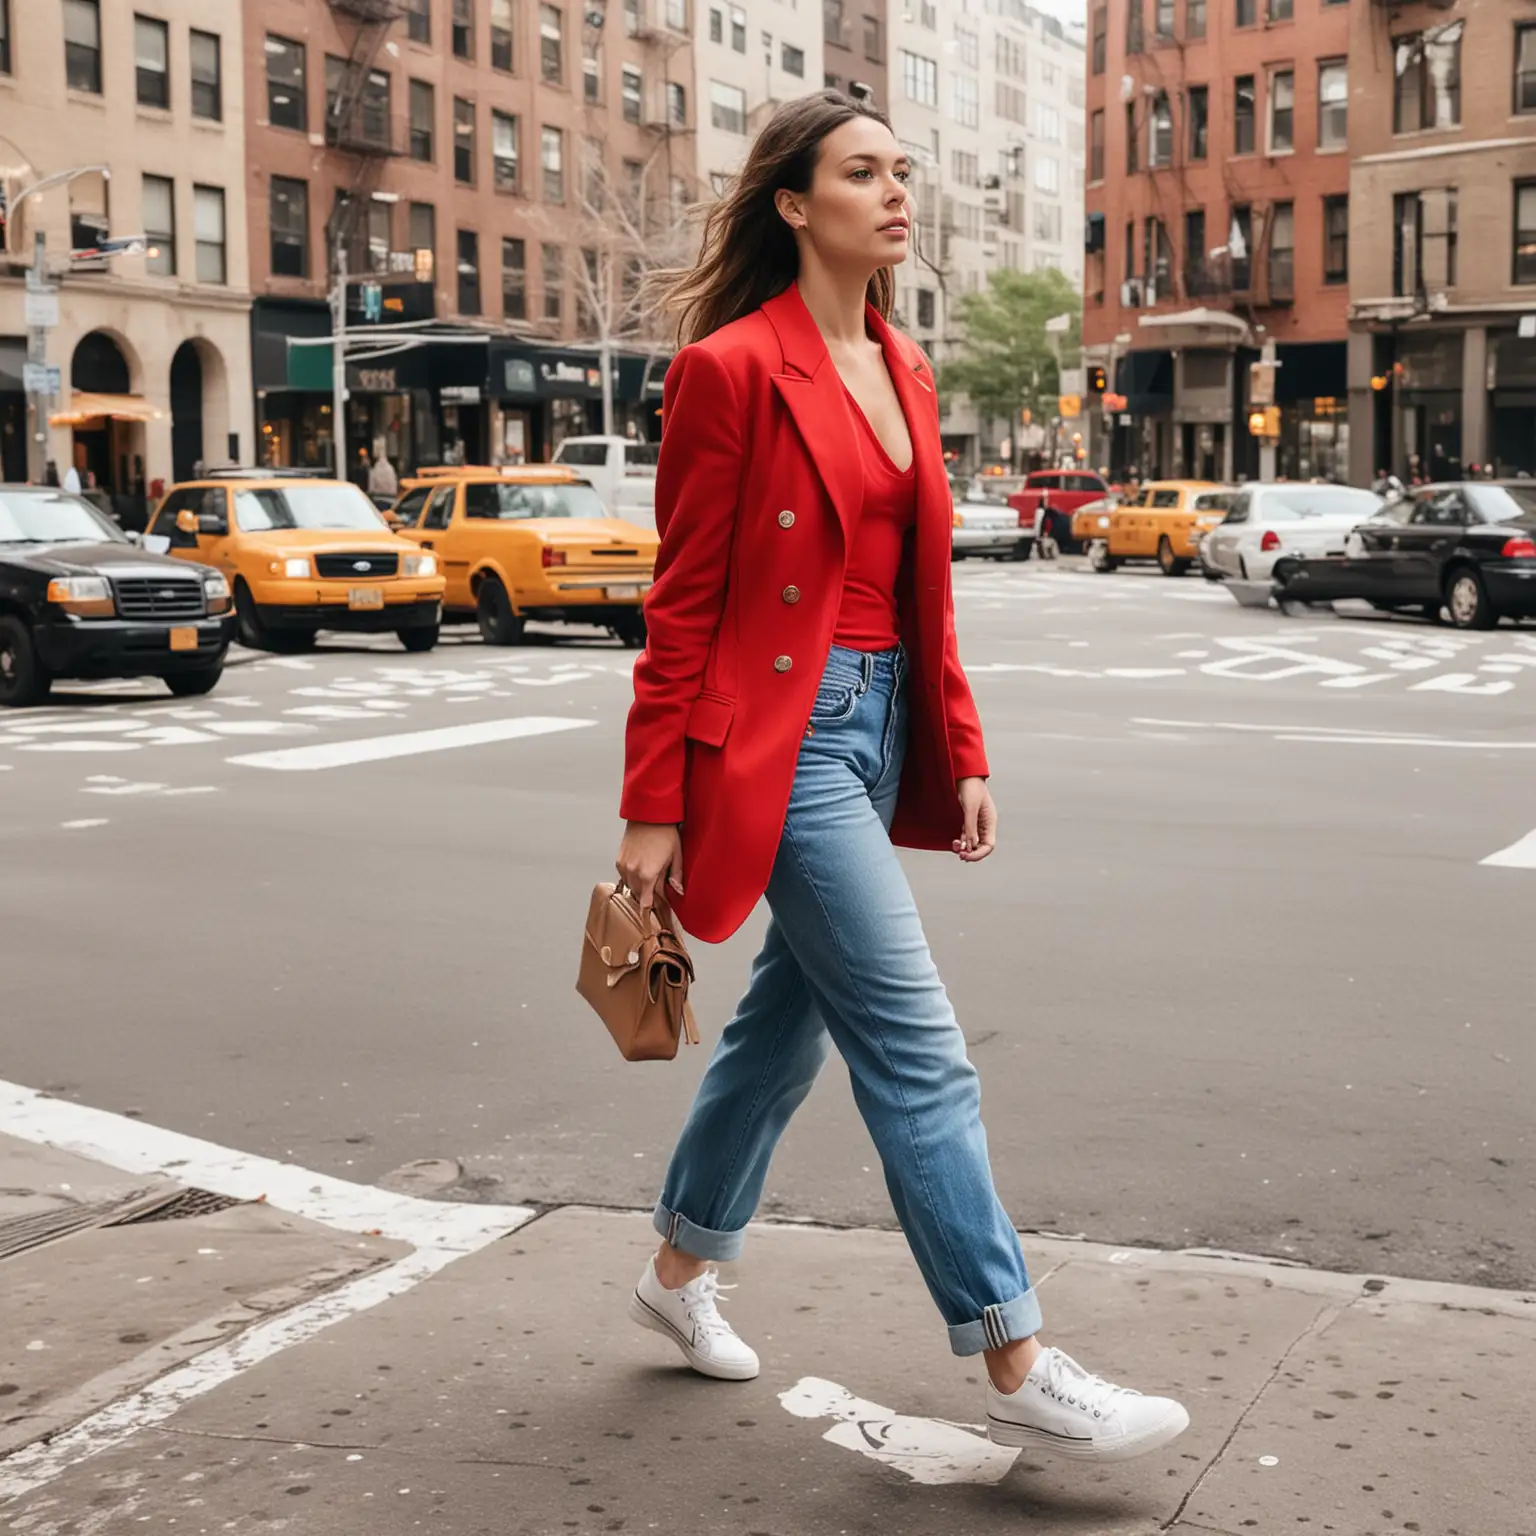 Fashionable Woman in Oversized Red Blazer Walking Through New York City